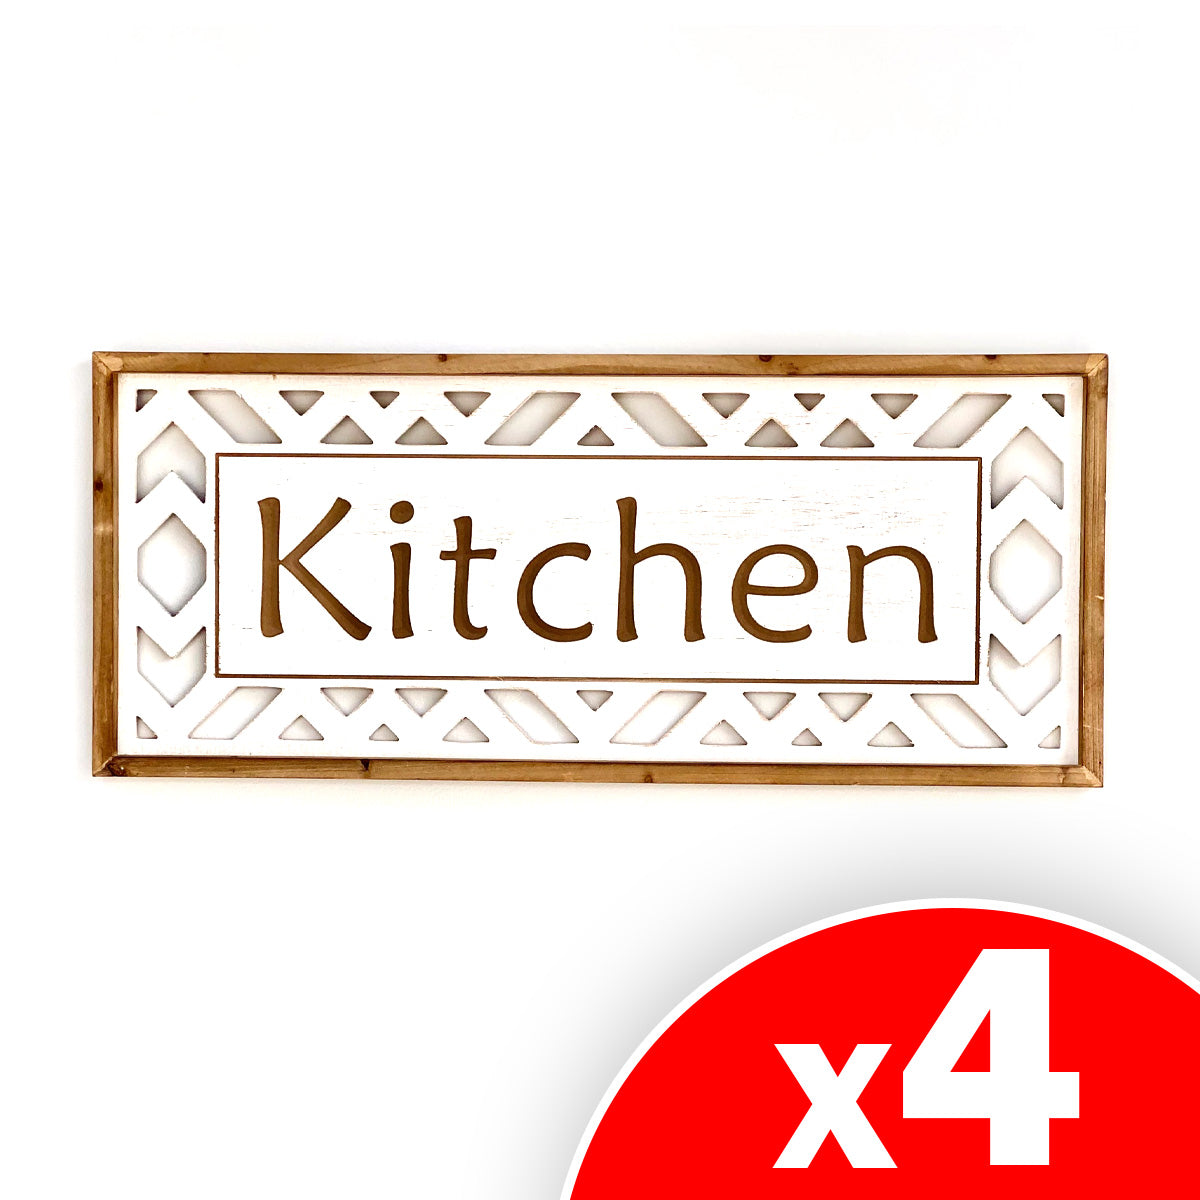 Image of Wood Wall Art with Cutout and "Kitchen" Carved Writing, 4 Pack